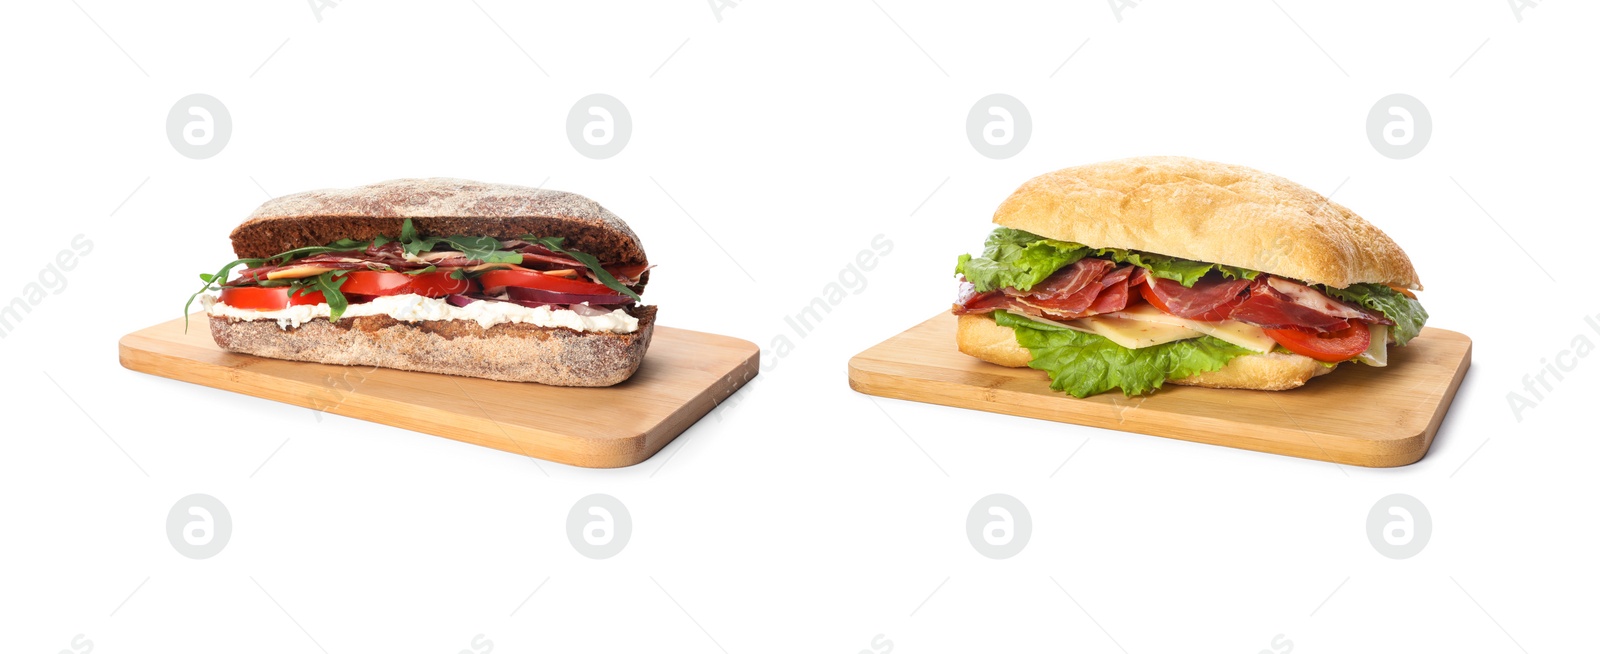 Image of Yummy sandwiches with vegetables and prosciutto on white background. Banner design 